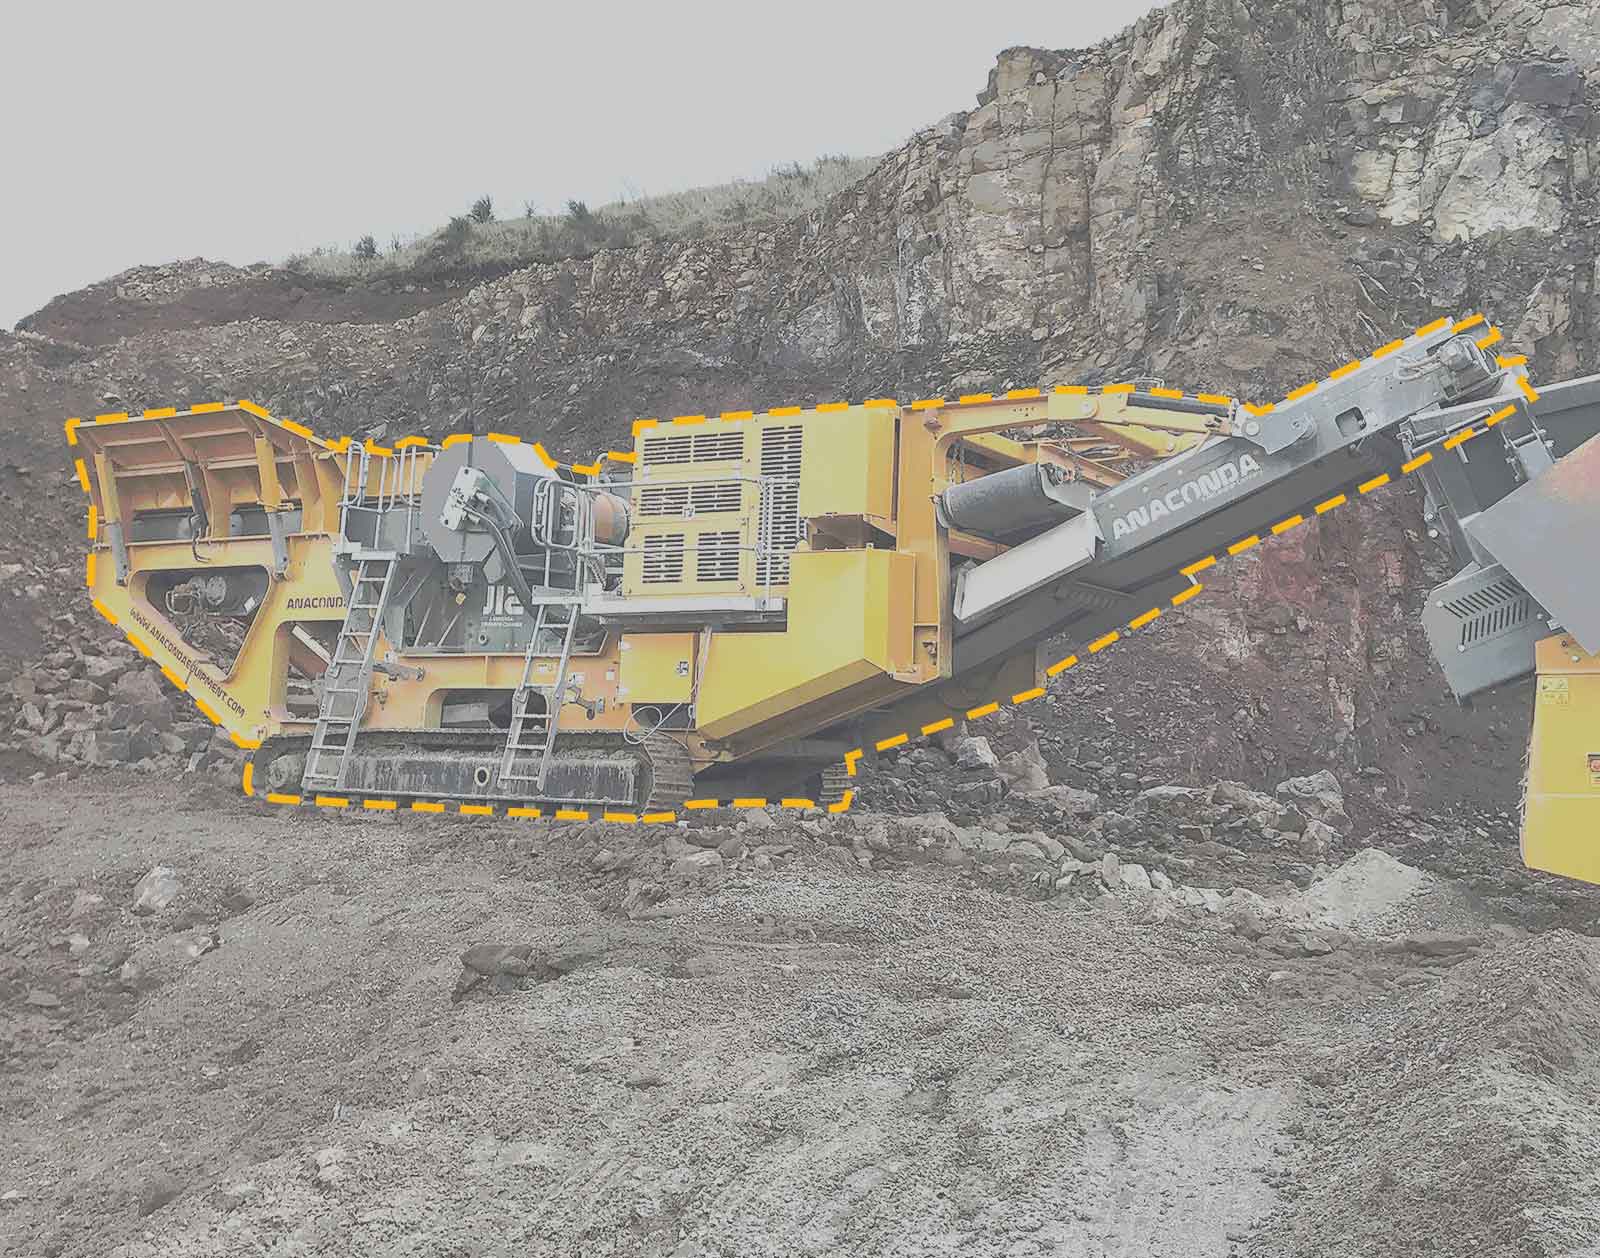 How does a stone crusher work mechanically?